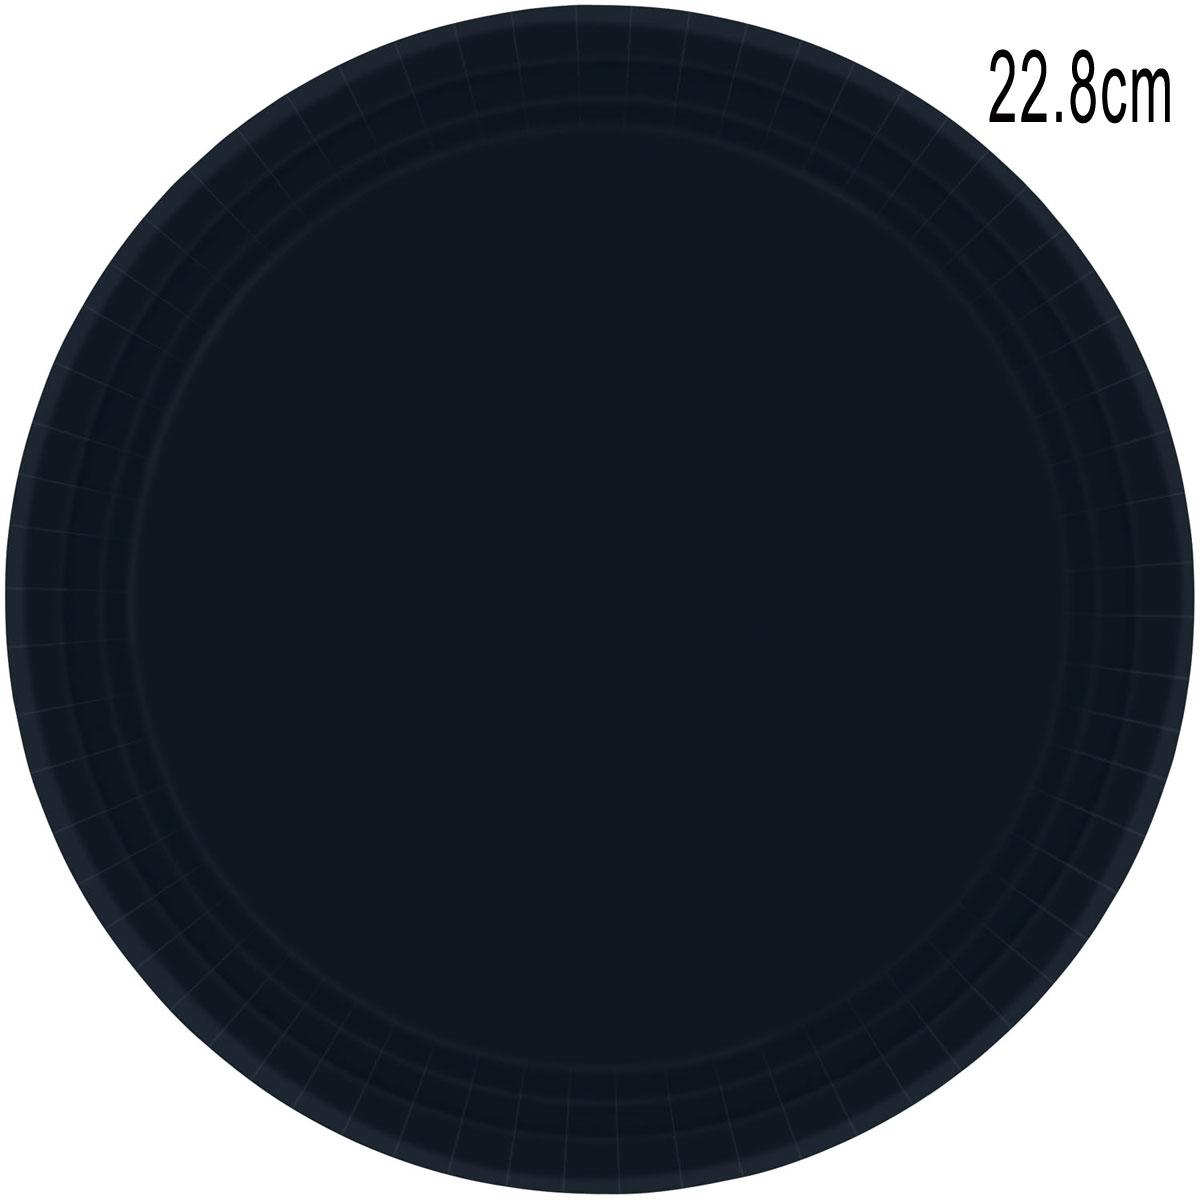 Pack 8 Jet Black Paper Dinner Plates 22.8cm by Amscan 55015-10 available here at Karnival Costumes online party shop